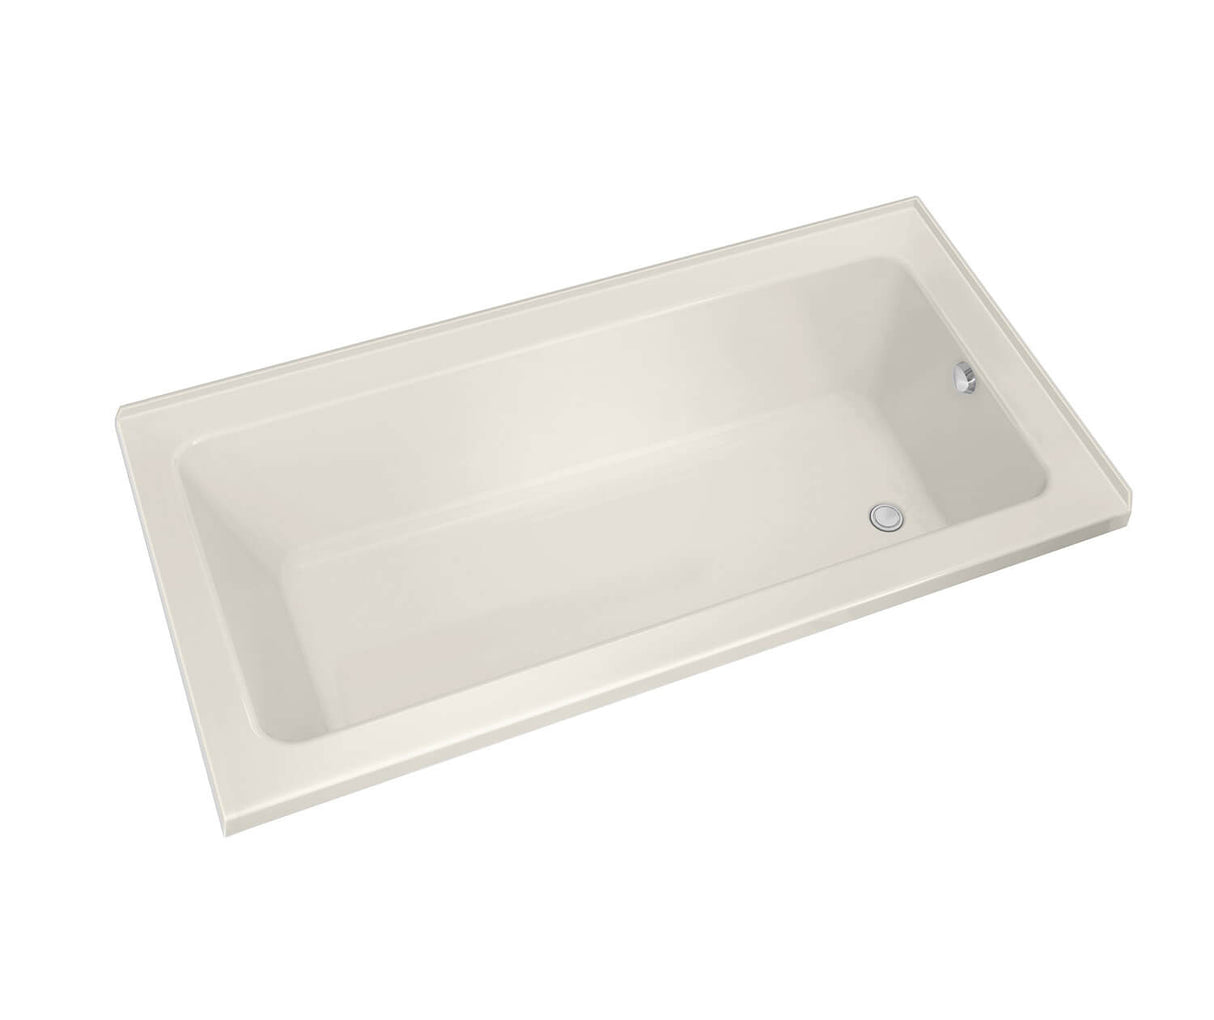 MAAX 106206-L-003-007 Pose 6632 IF Acrylic Corner Right Left-Hand Drain Whirlpool Bathtub in Biscuit